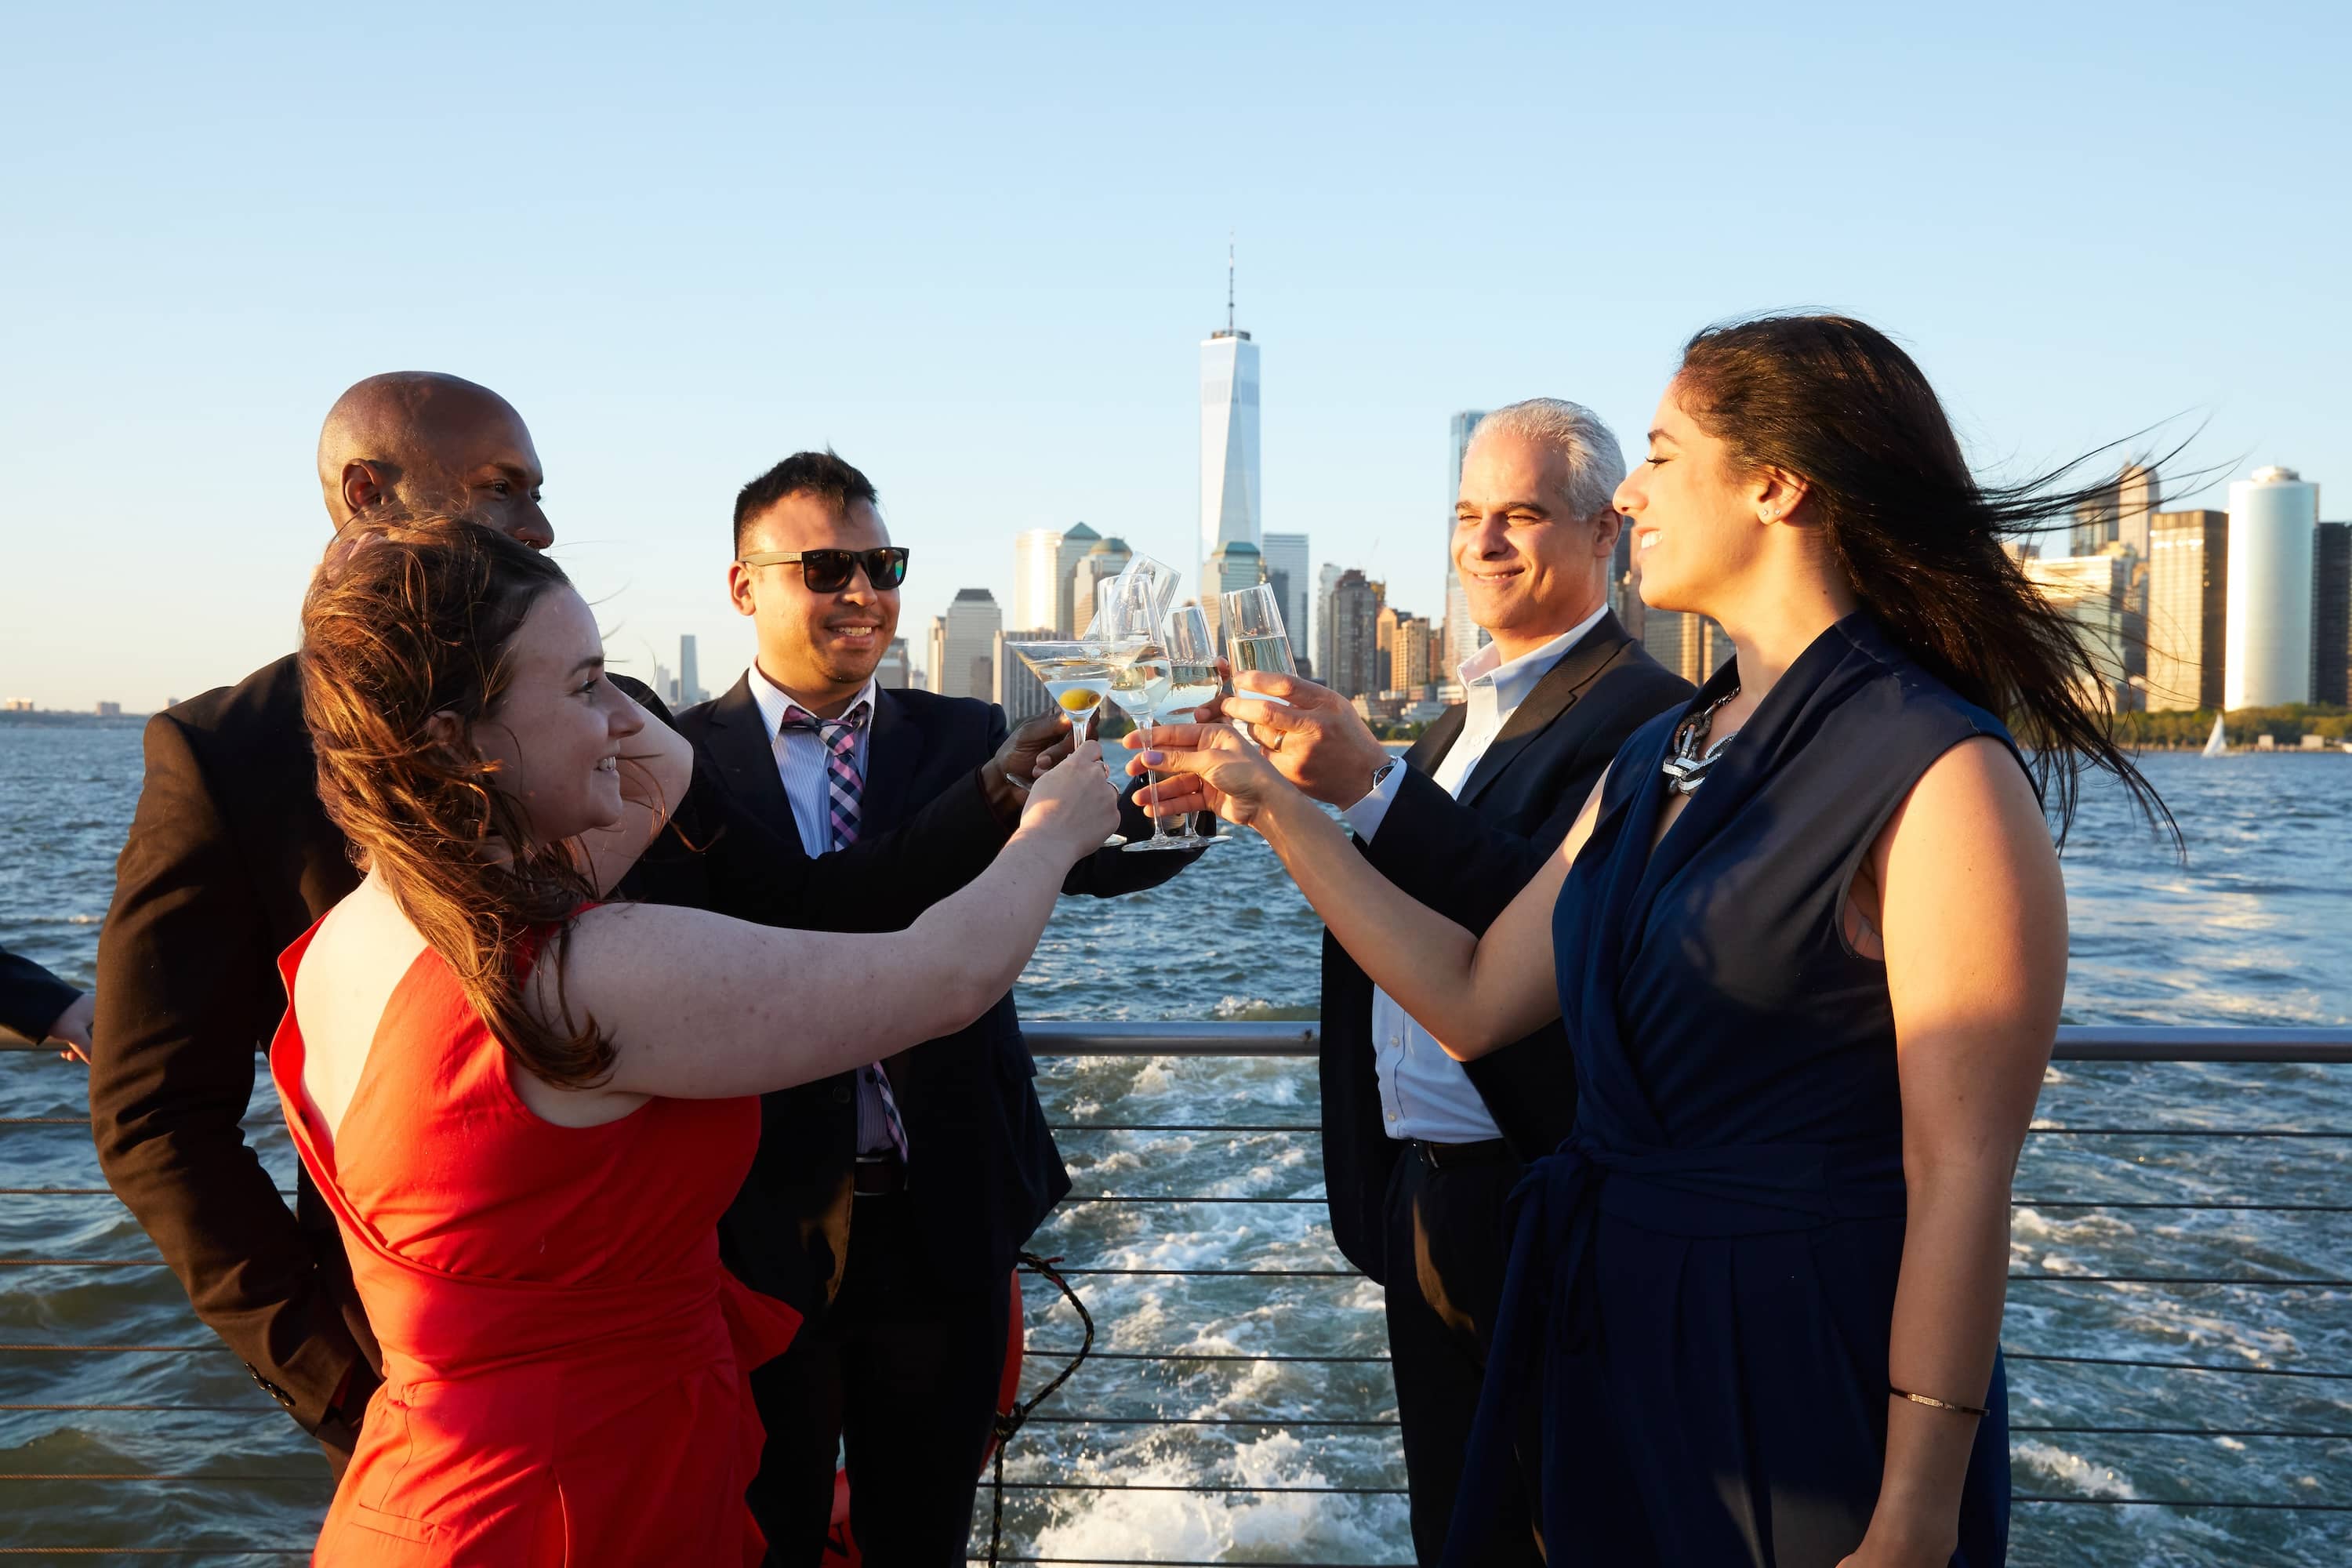 Group of Employees at a Corporate Event onboard City Cruises